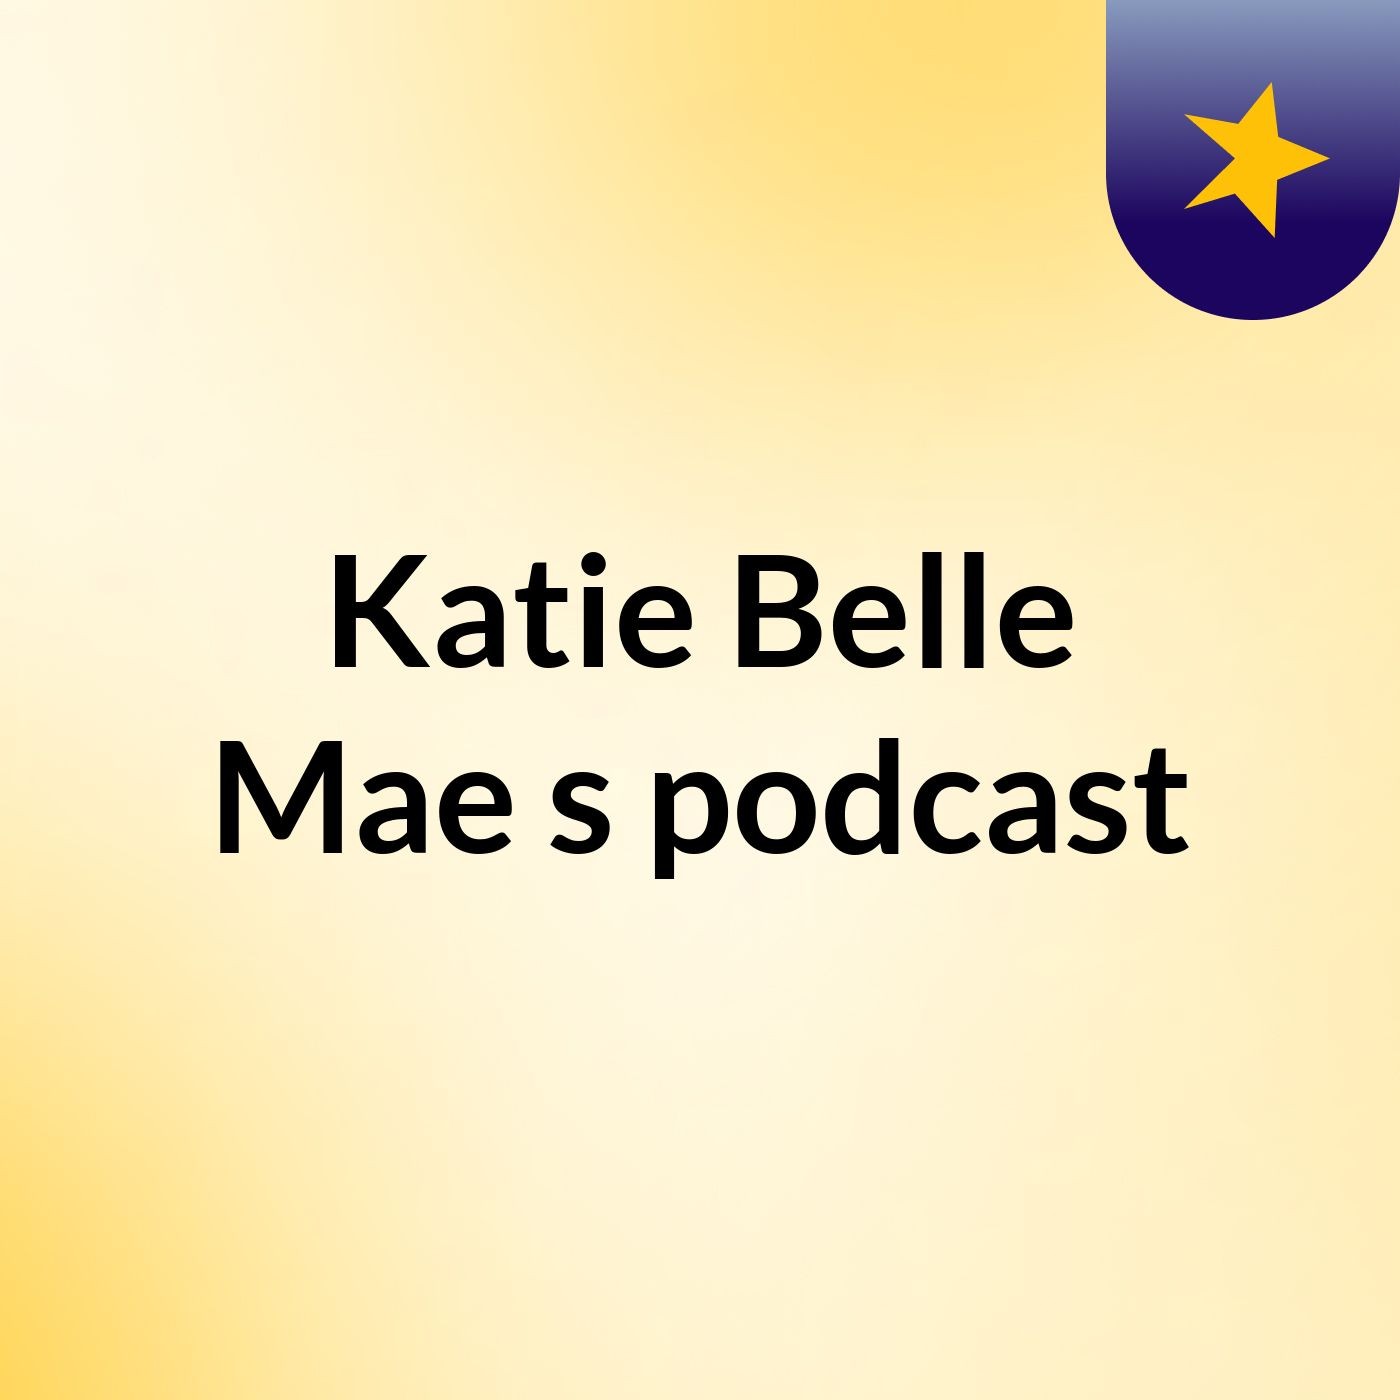 Katie Belle Mae's podcast